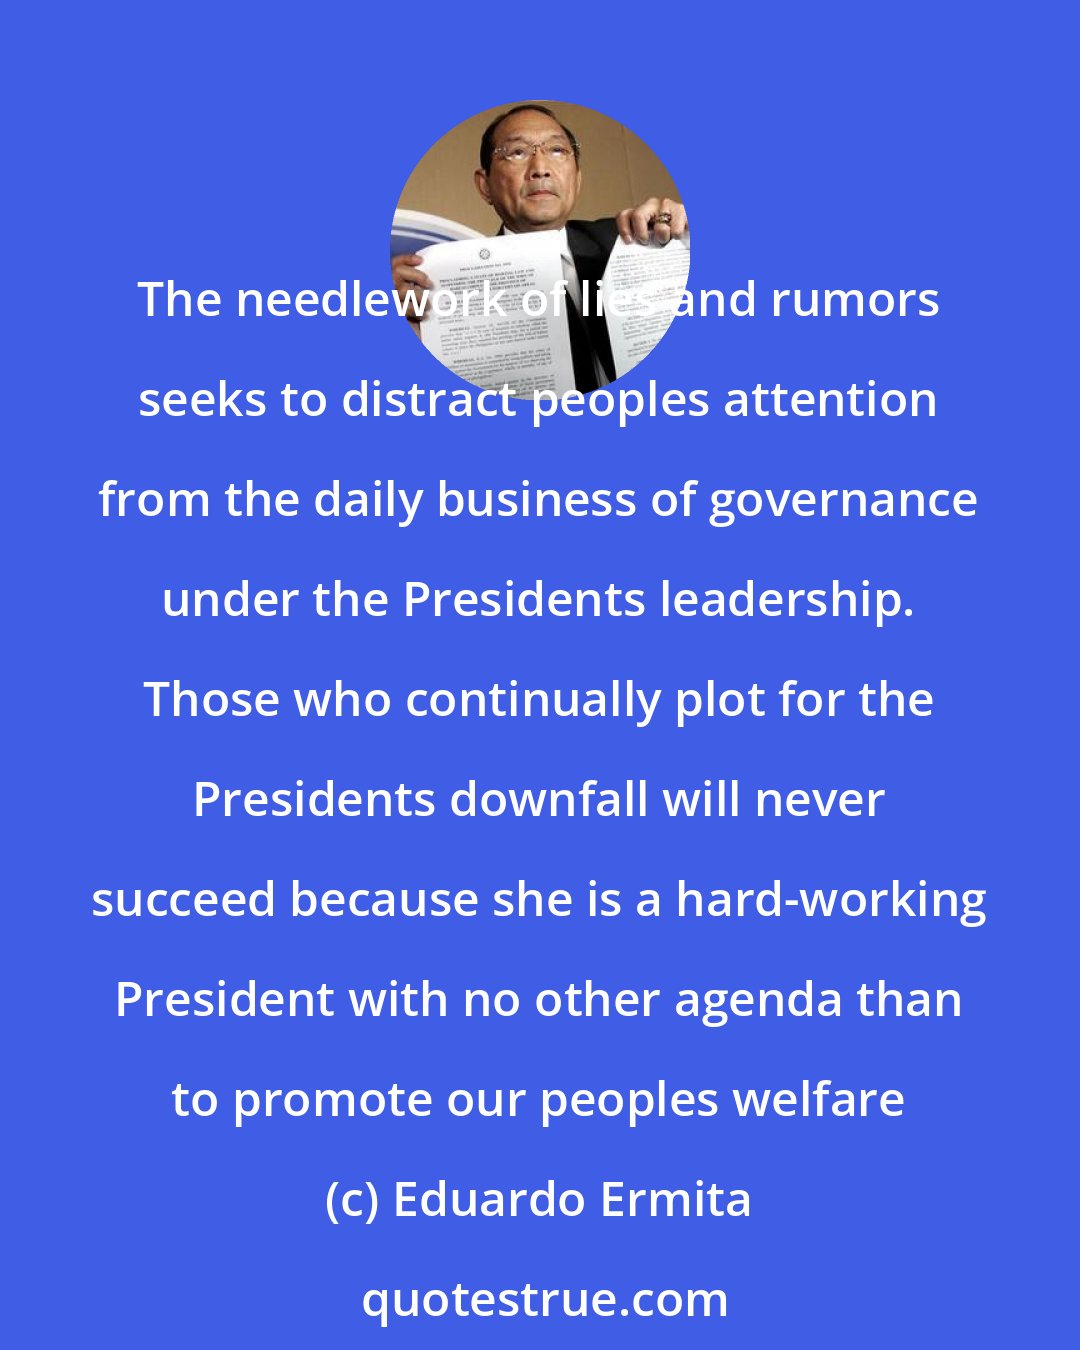 Eduardo Ermita: The needlework of lies and rumors seeks to distract peoples attention from the daily business of governance under the Presidents leadership. Those who continually plot for the Presidents downfall will never succeed because she is a hard-working President with no other agenda than to promote our peoples welfare